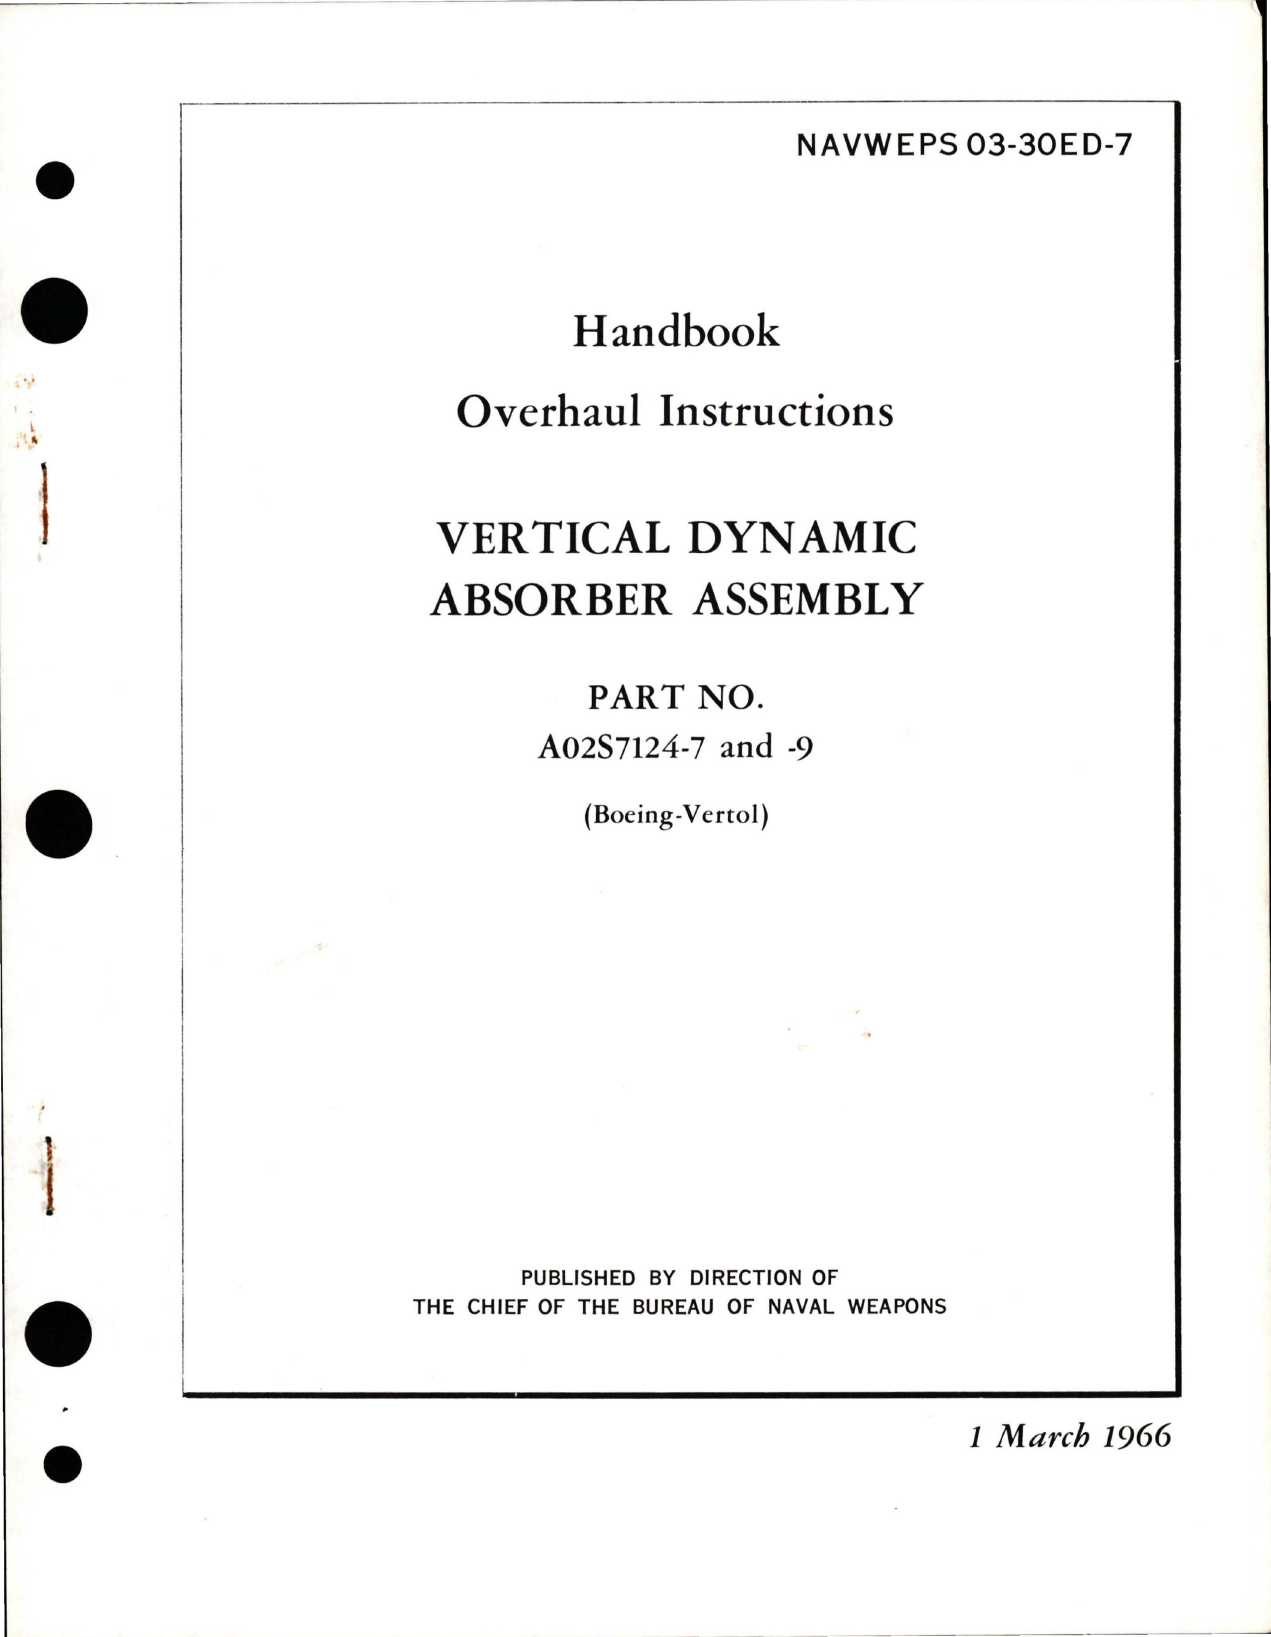 Sample page 1 from AirCorps Library document: Overhaul Instructions for Vertical Dynamic Absorber Assembly - Part A02S7124-7, A02S7124-9